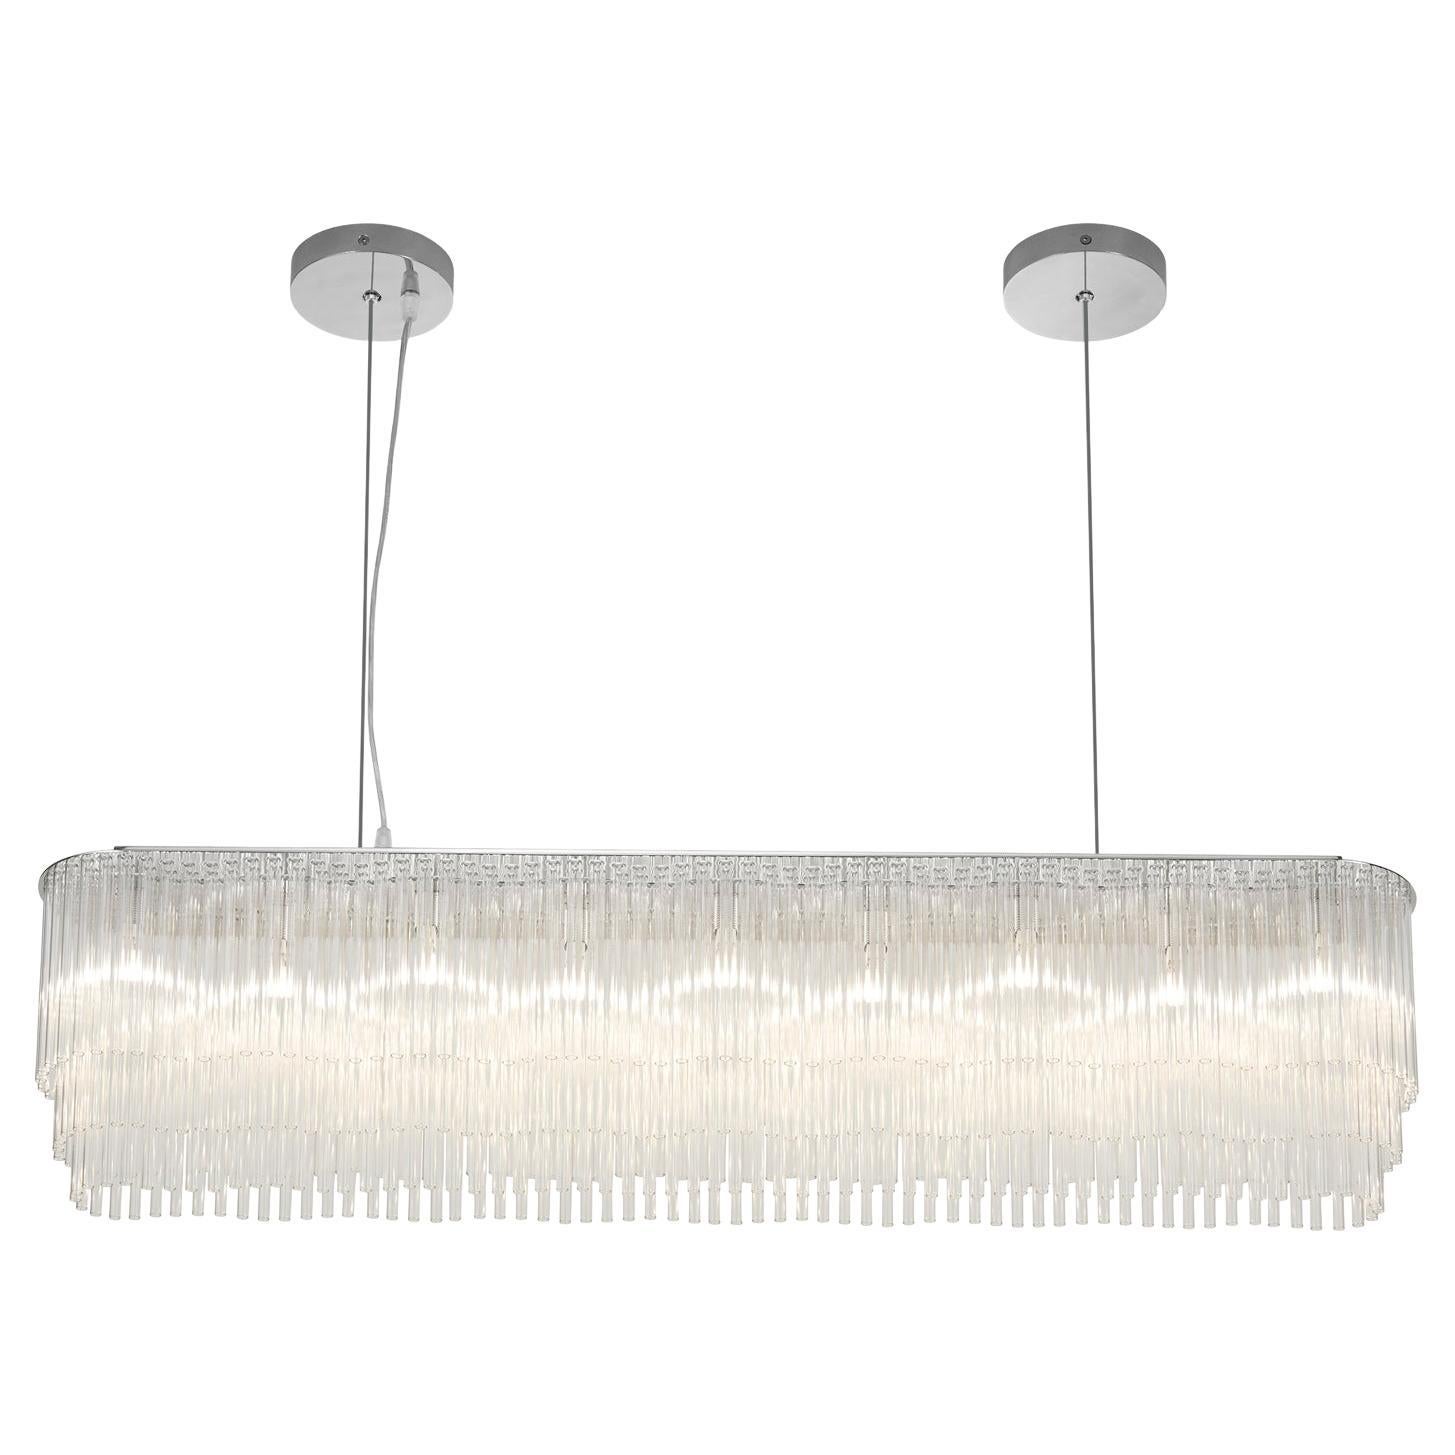 Linear Chandelier Thin 1010mm/39.75" in Brushed Nickel / Tiered Glass Profile For Sale